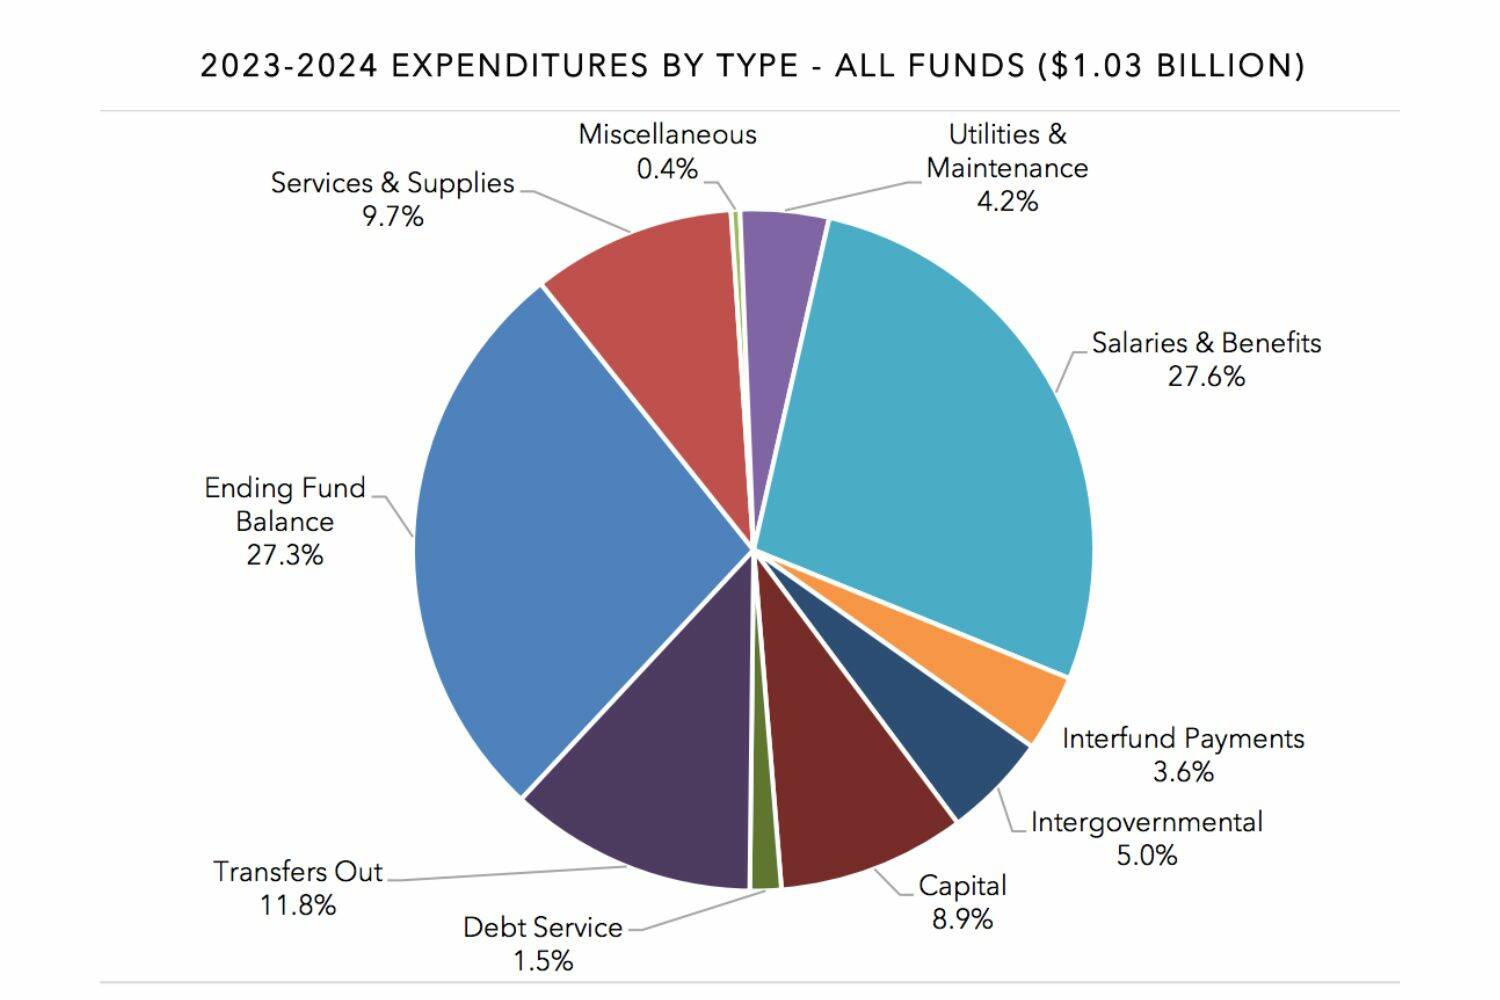 City of Redmond expenditures by type for 2023-2024. (Courtesy of City of Redmond)